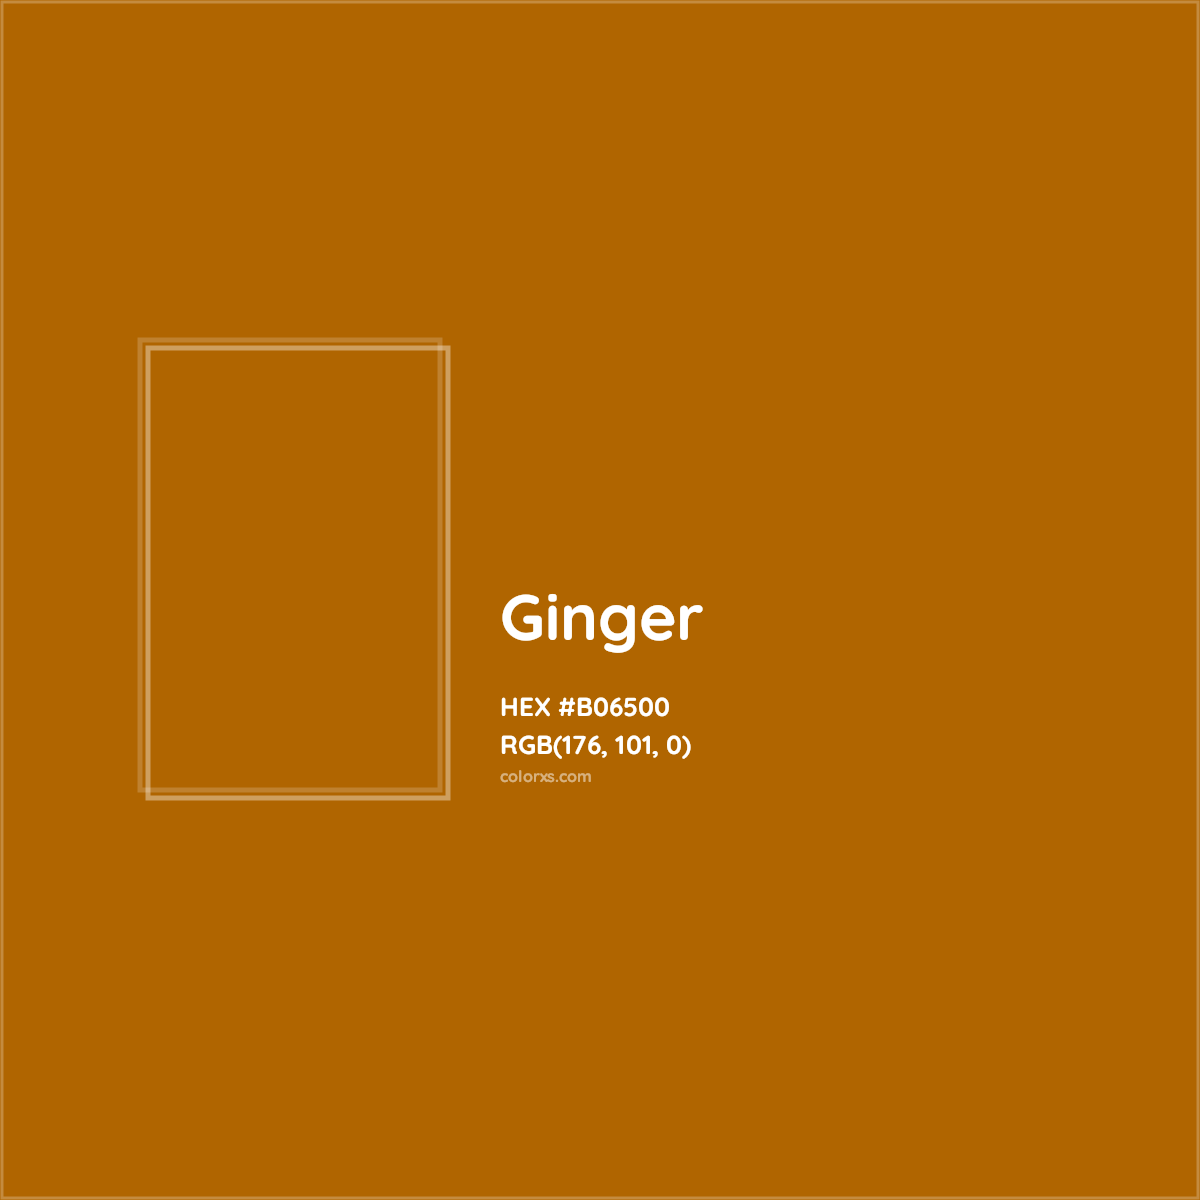 HEX #B06500 Ginger Color - Color Code